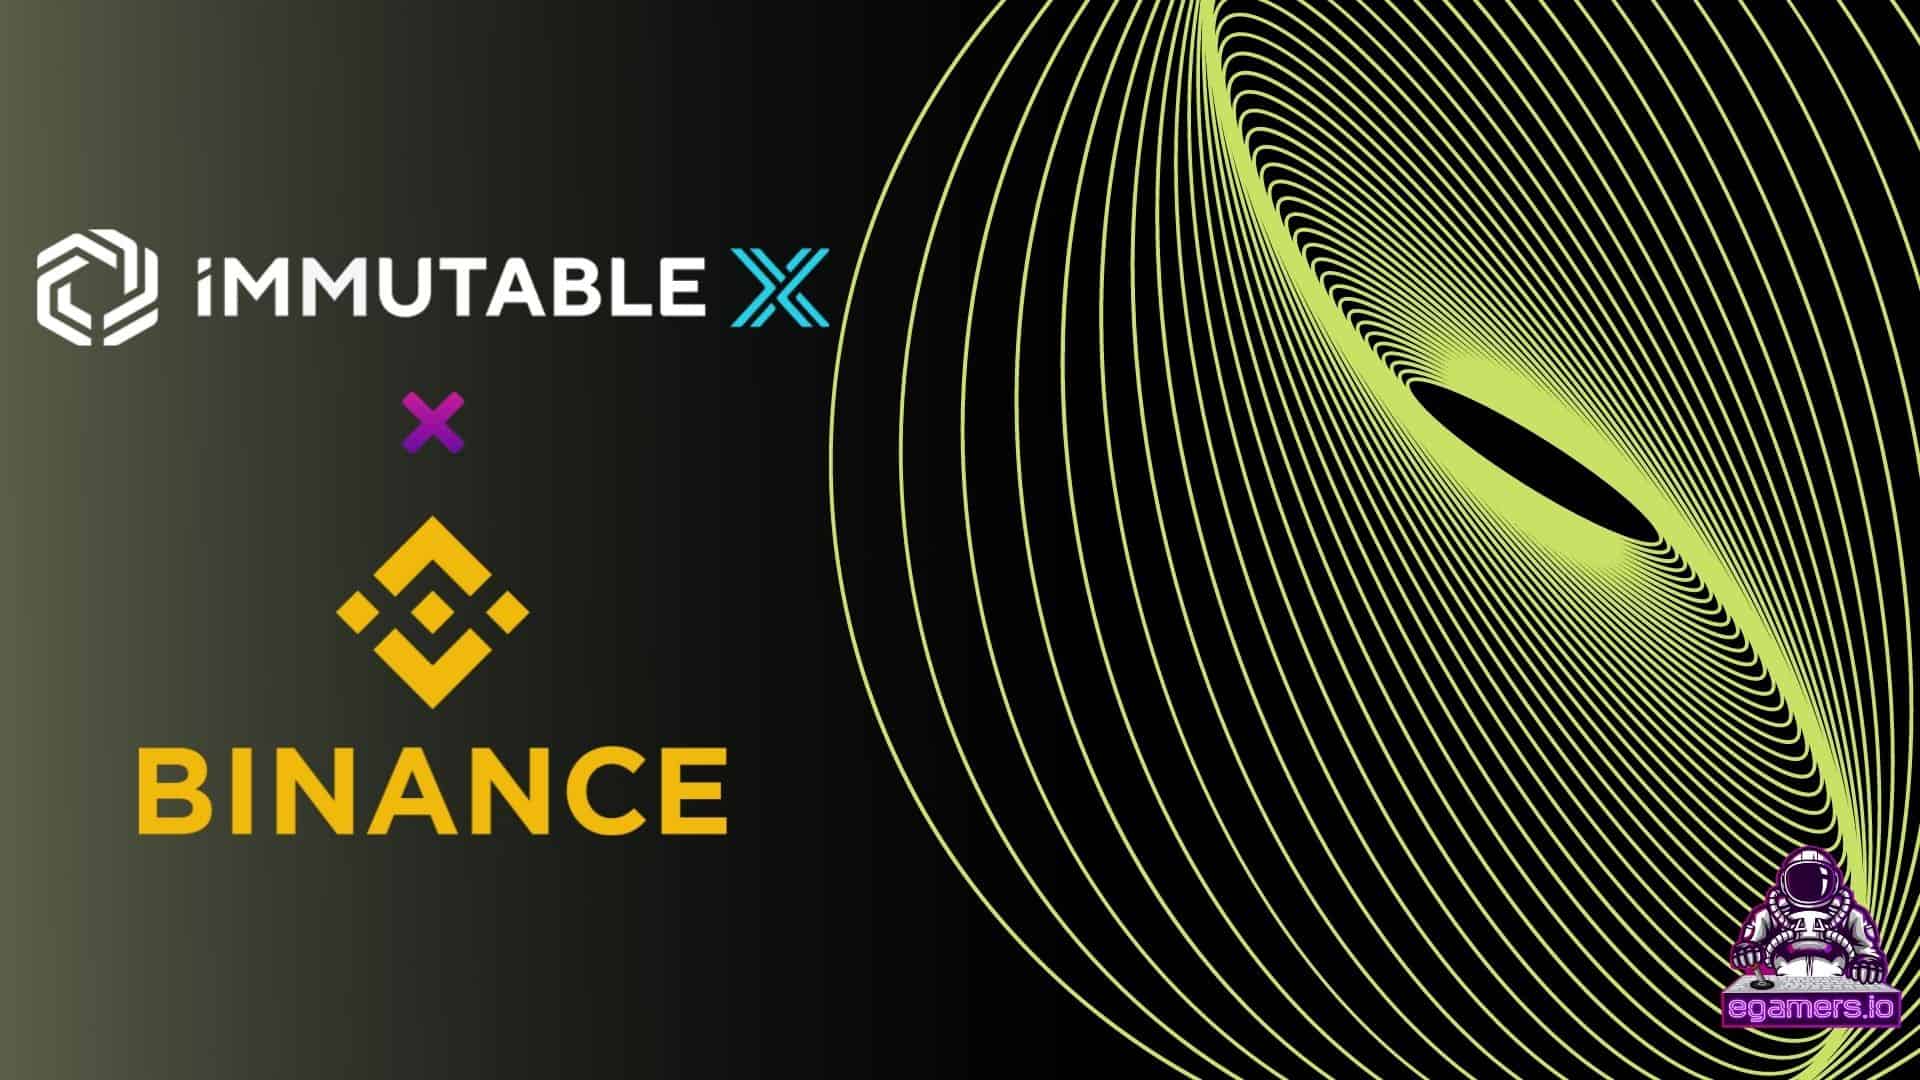 Binance Will List Immutable X IMX Token As Announced Today Immutable X Inks is partnering with Turner Sports and aims to take on the premier sports industry by building blockchain games. 